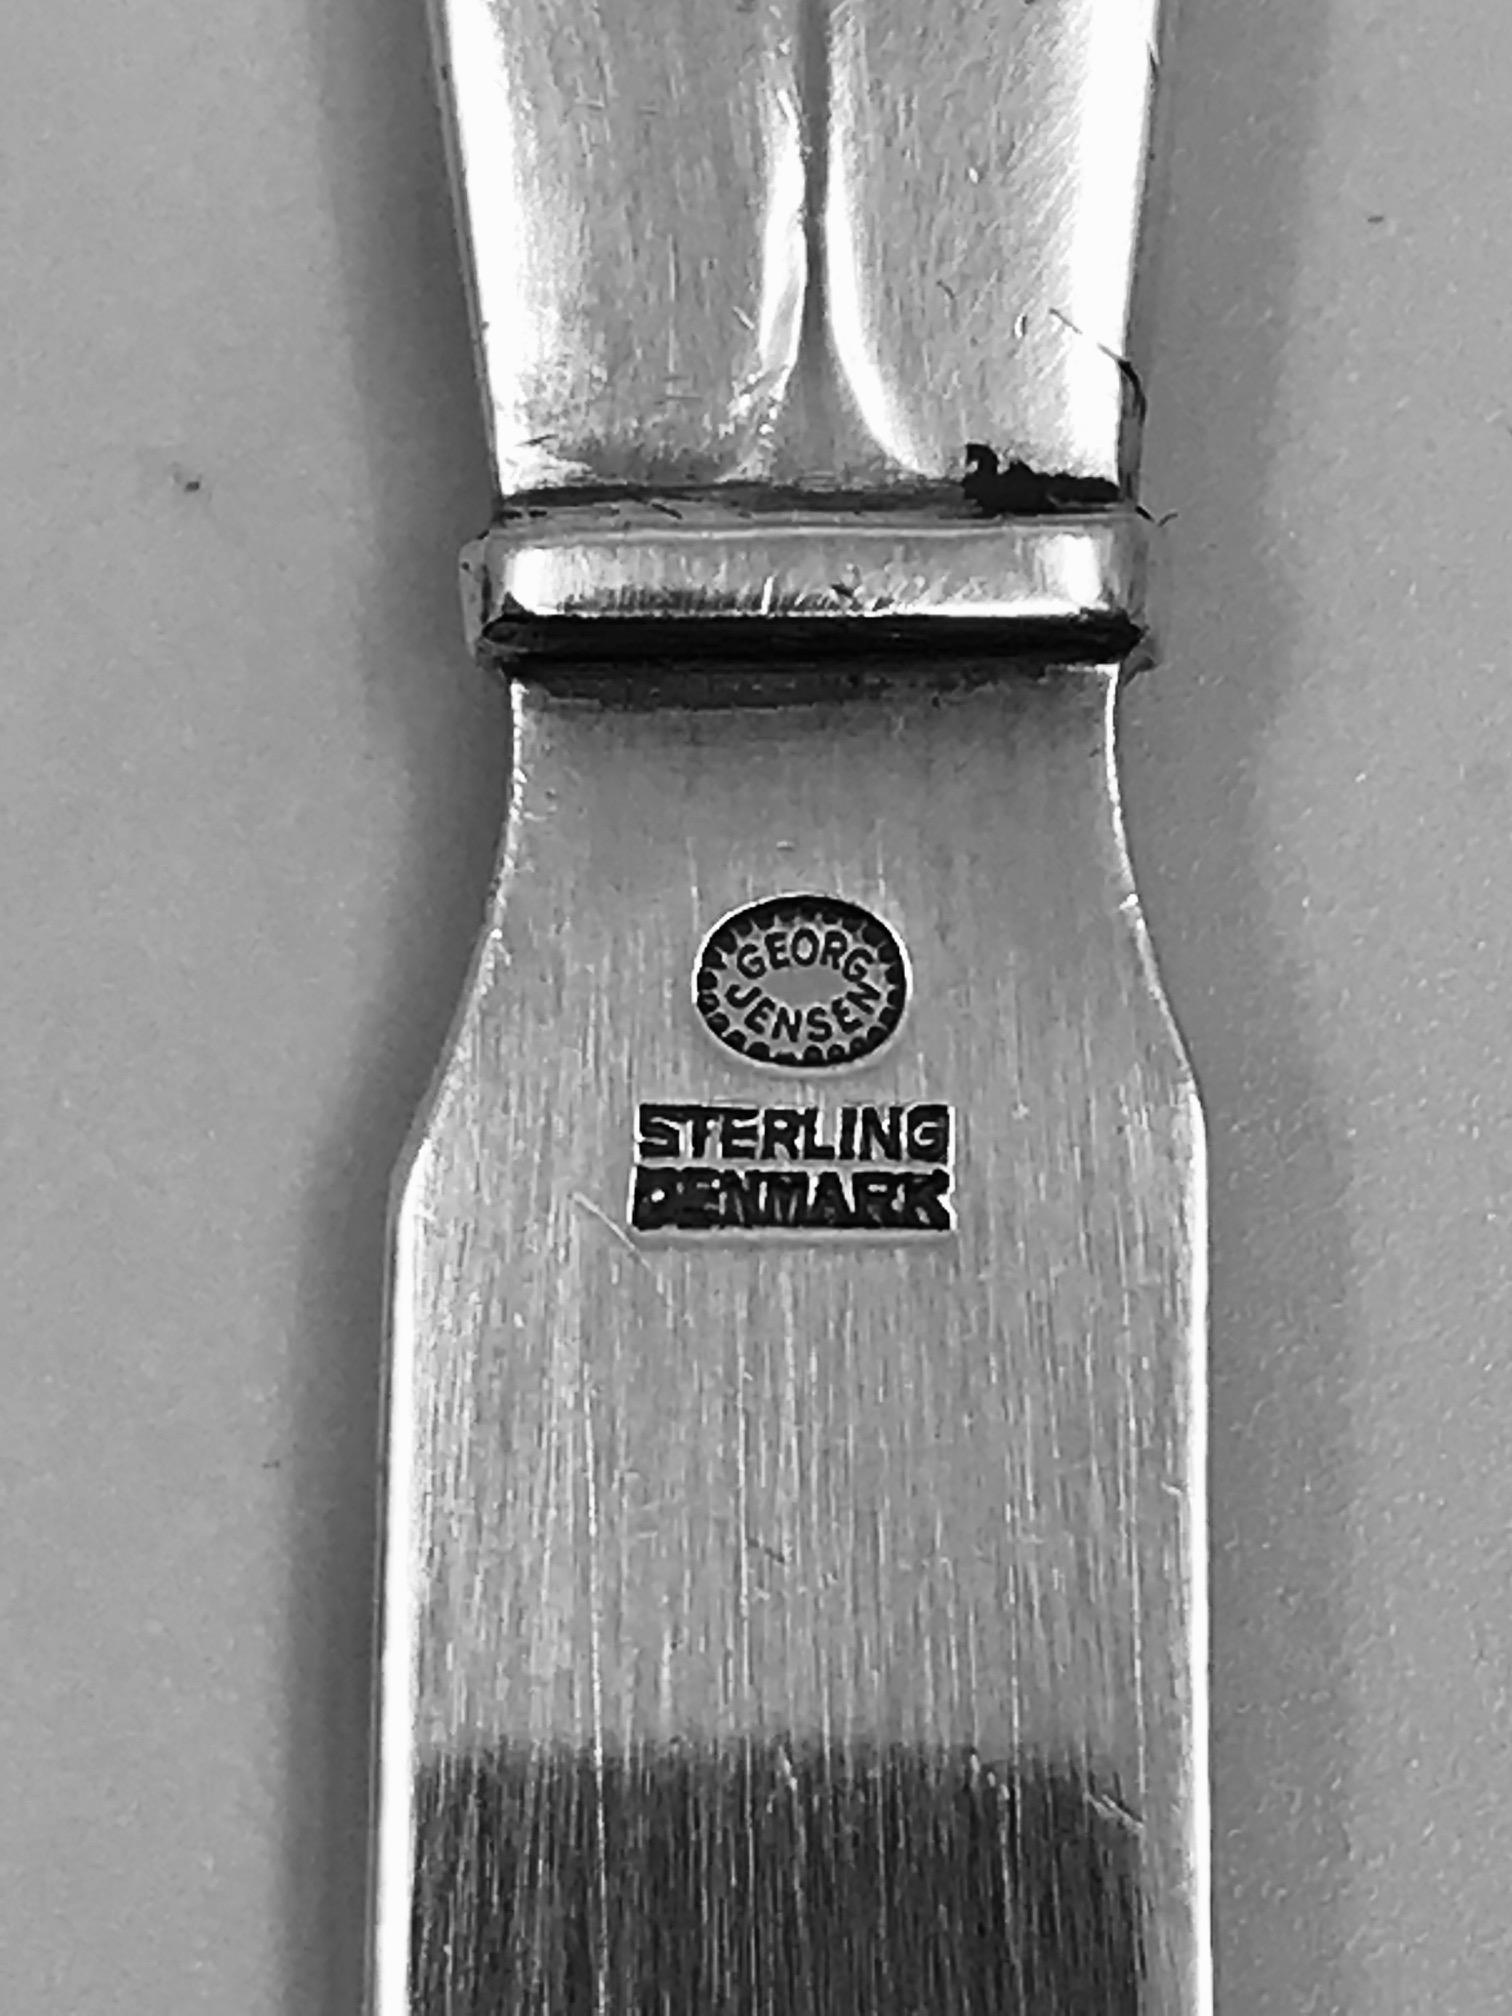 Sterling silver Georg Jensen butter spreader, item 046 in the very rare Bittersweet pattern, design #79 from 1940 by Gundorph Albertus. This is the sister pattern to Cactus,

Additional information:
Material: Sterling silver
Styles: Art